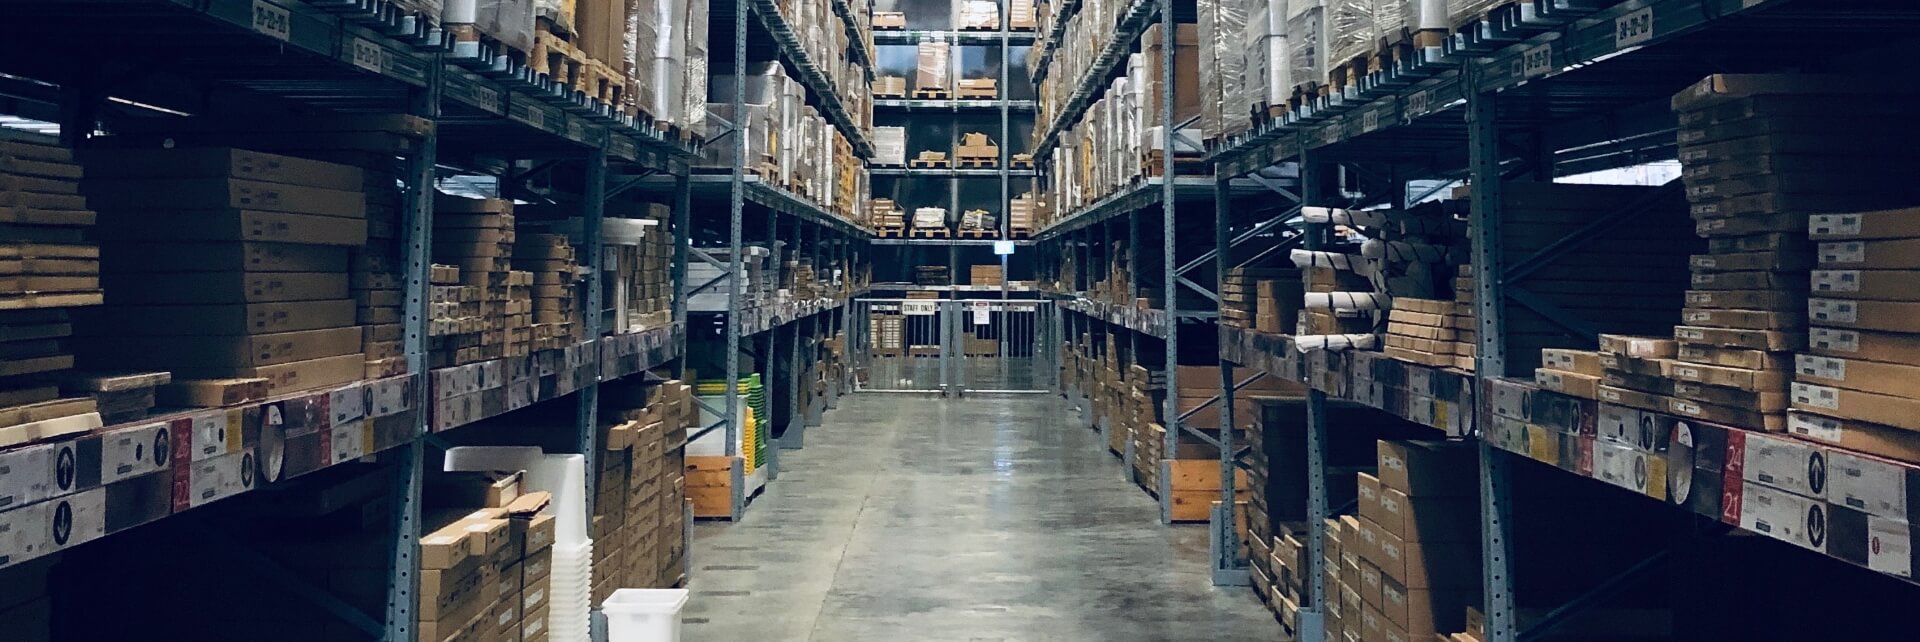 Inside an Ambient Warehouse